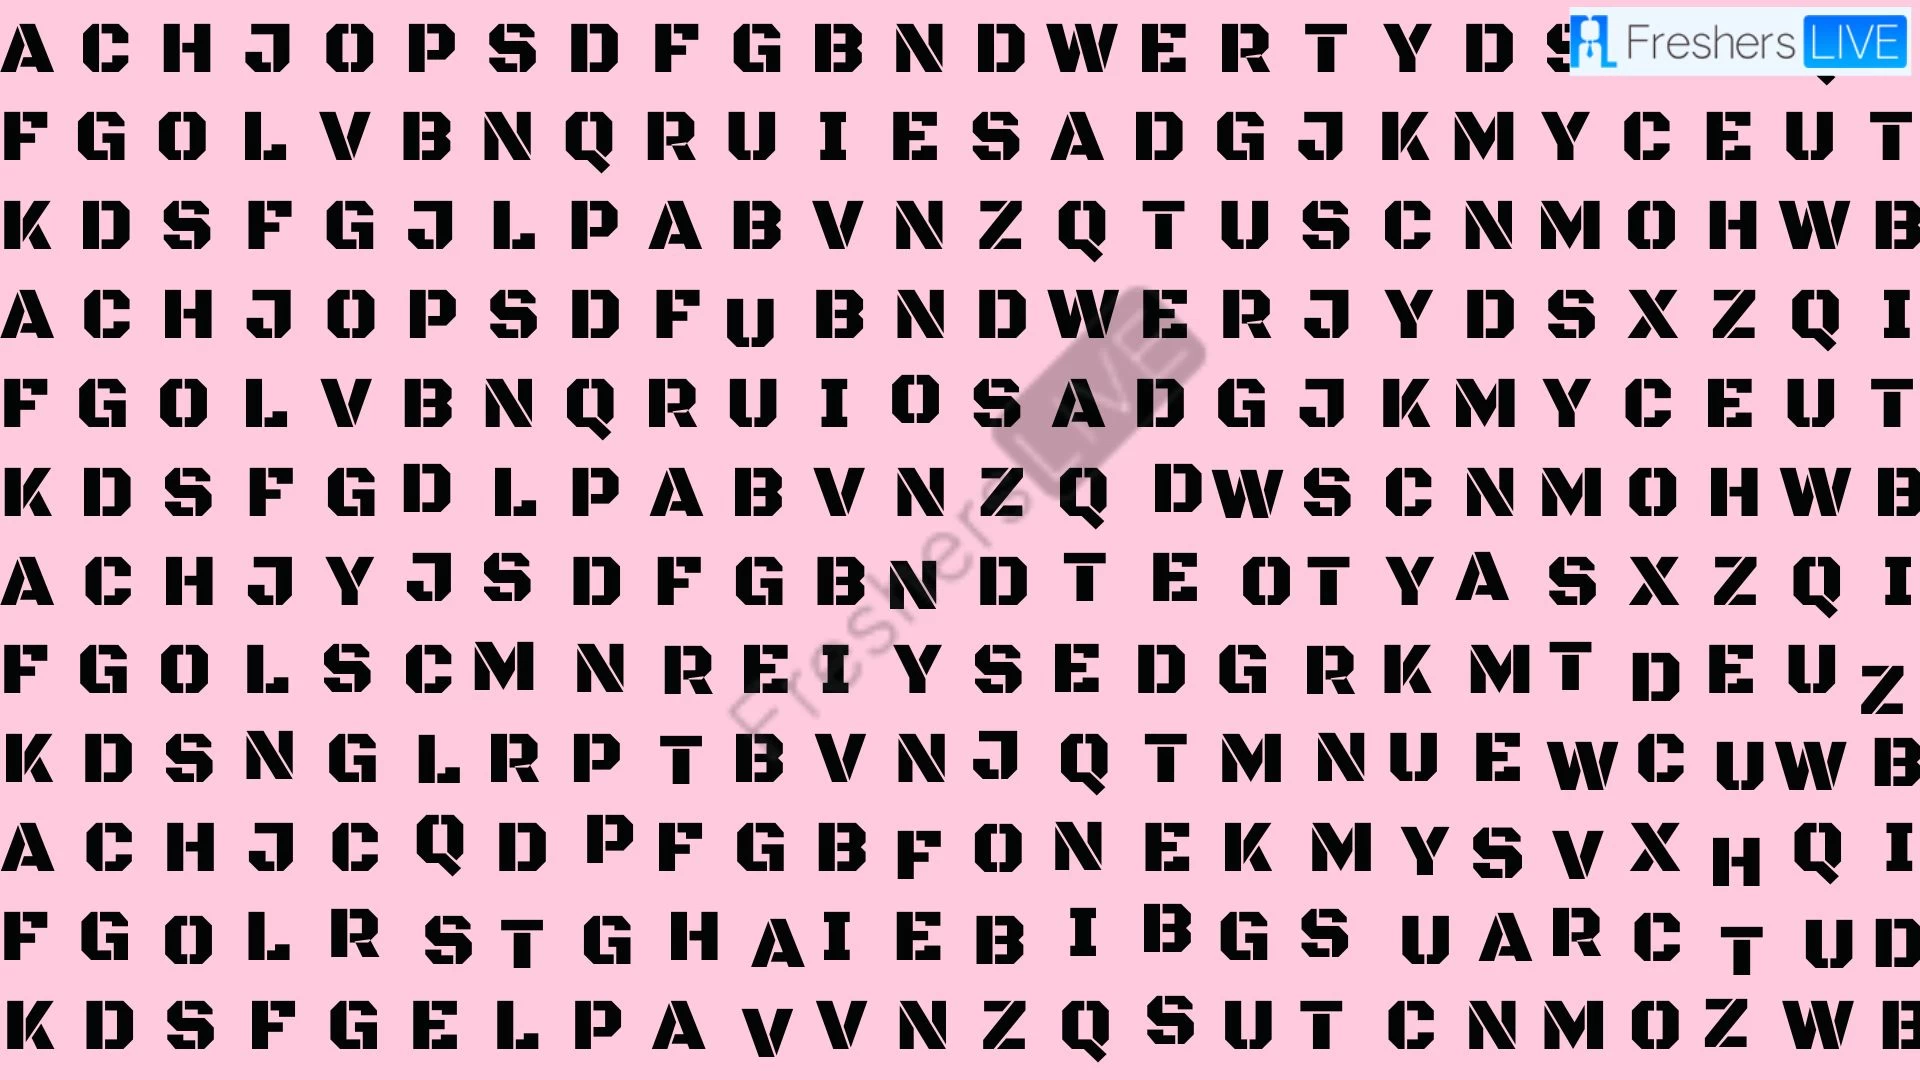 Are you smart enough to Find the word Catch in Just 10 Seconds?